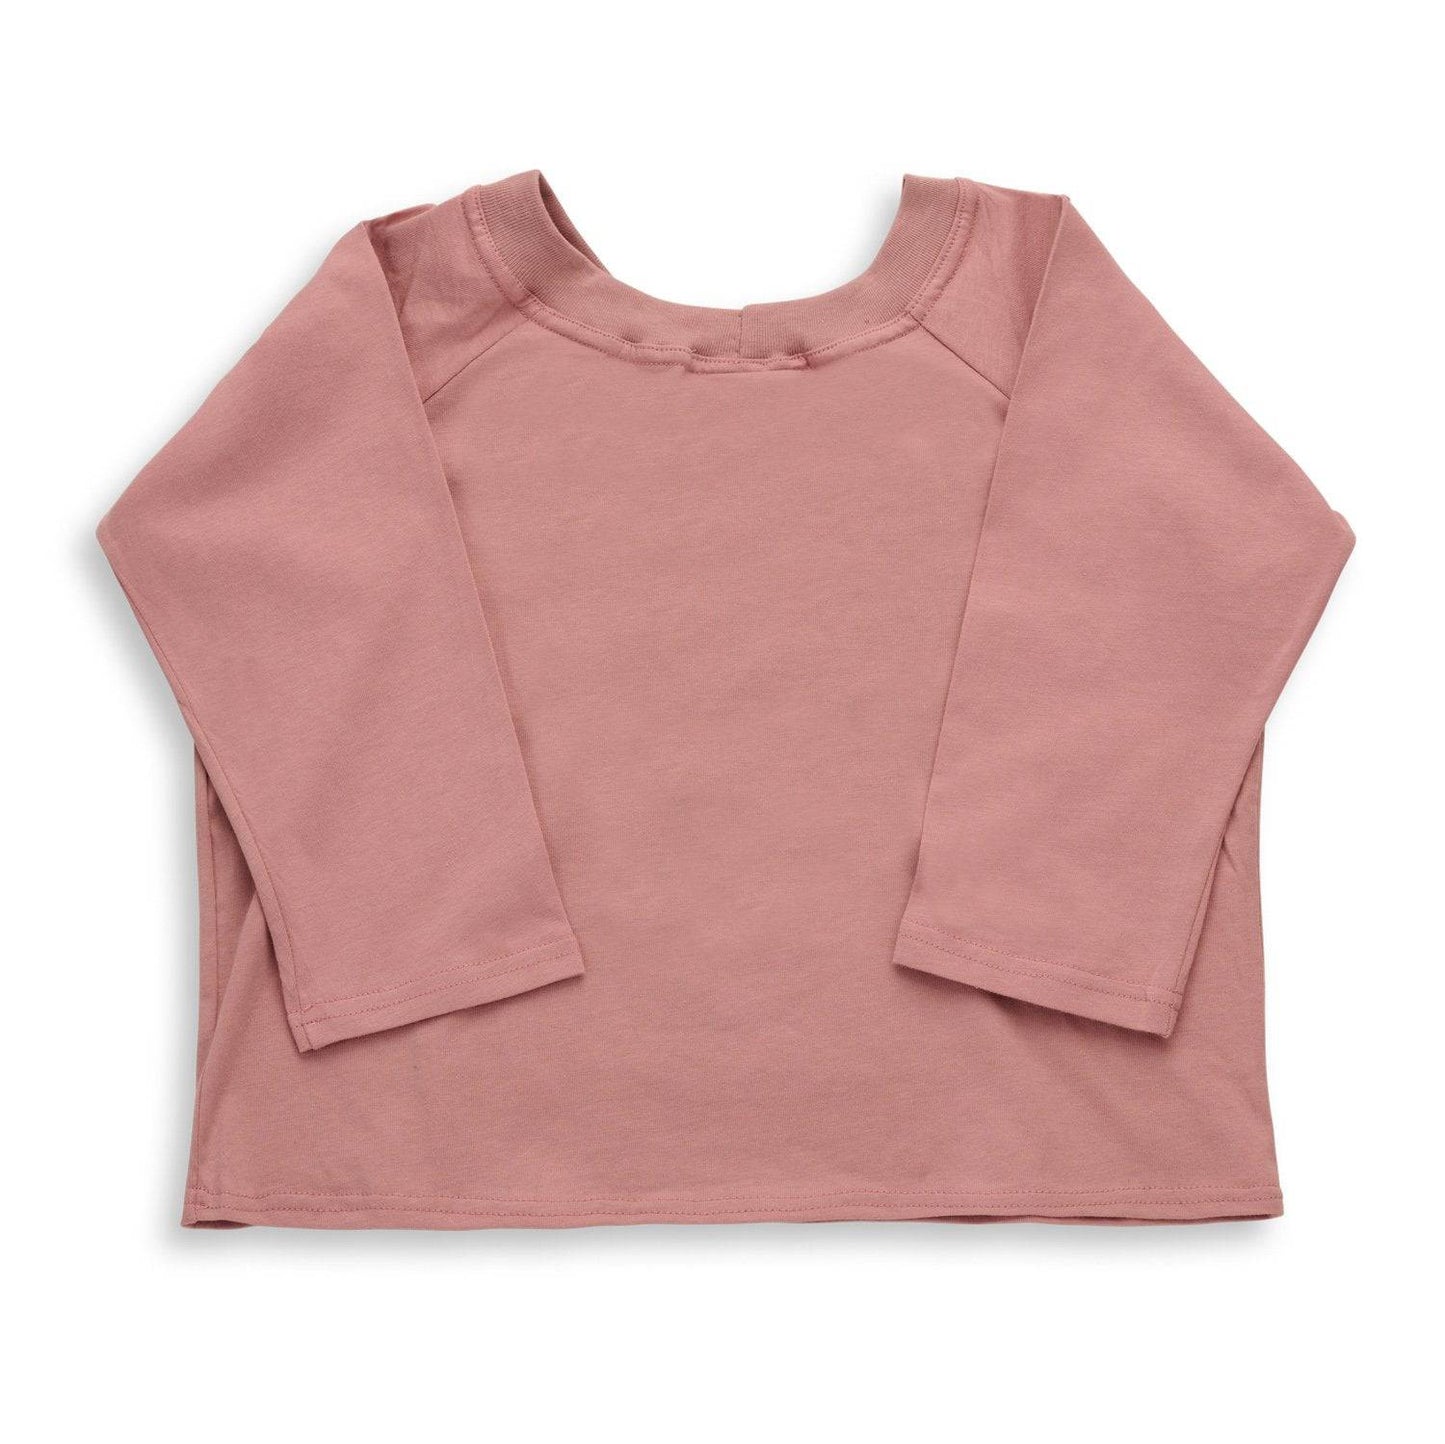 The Boat T-Shirts (girls - pink) - CooCootales